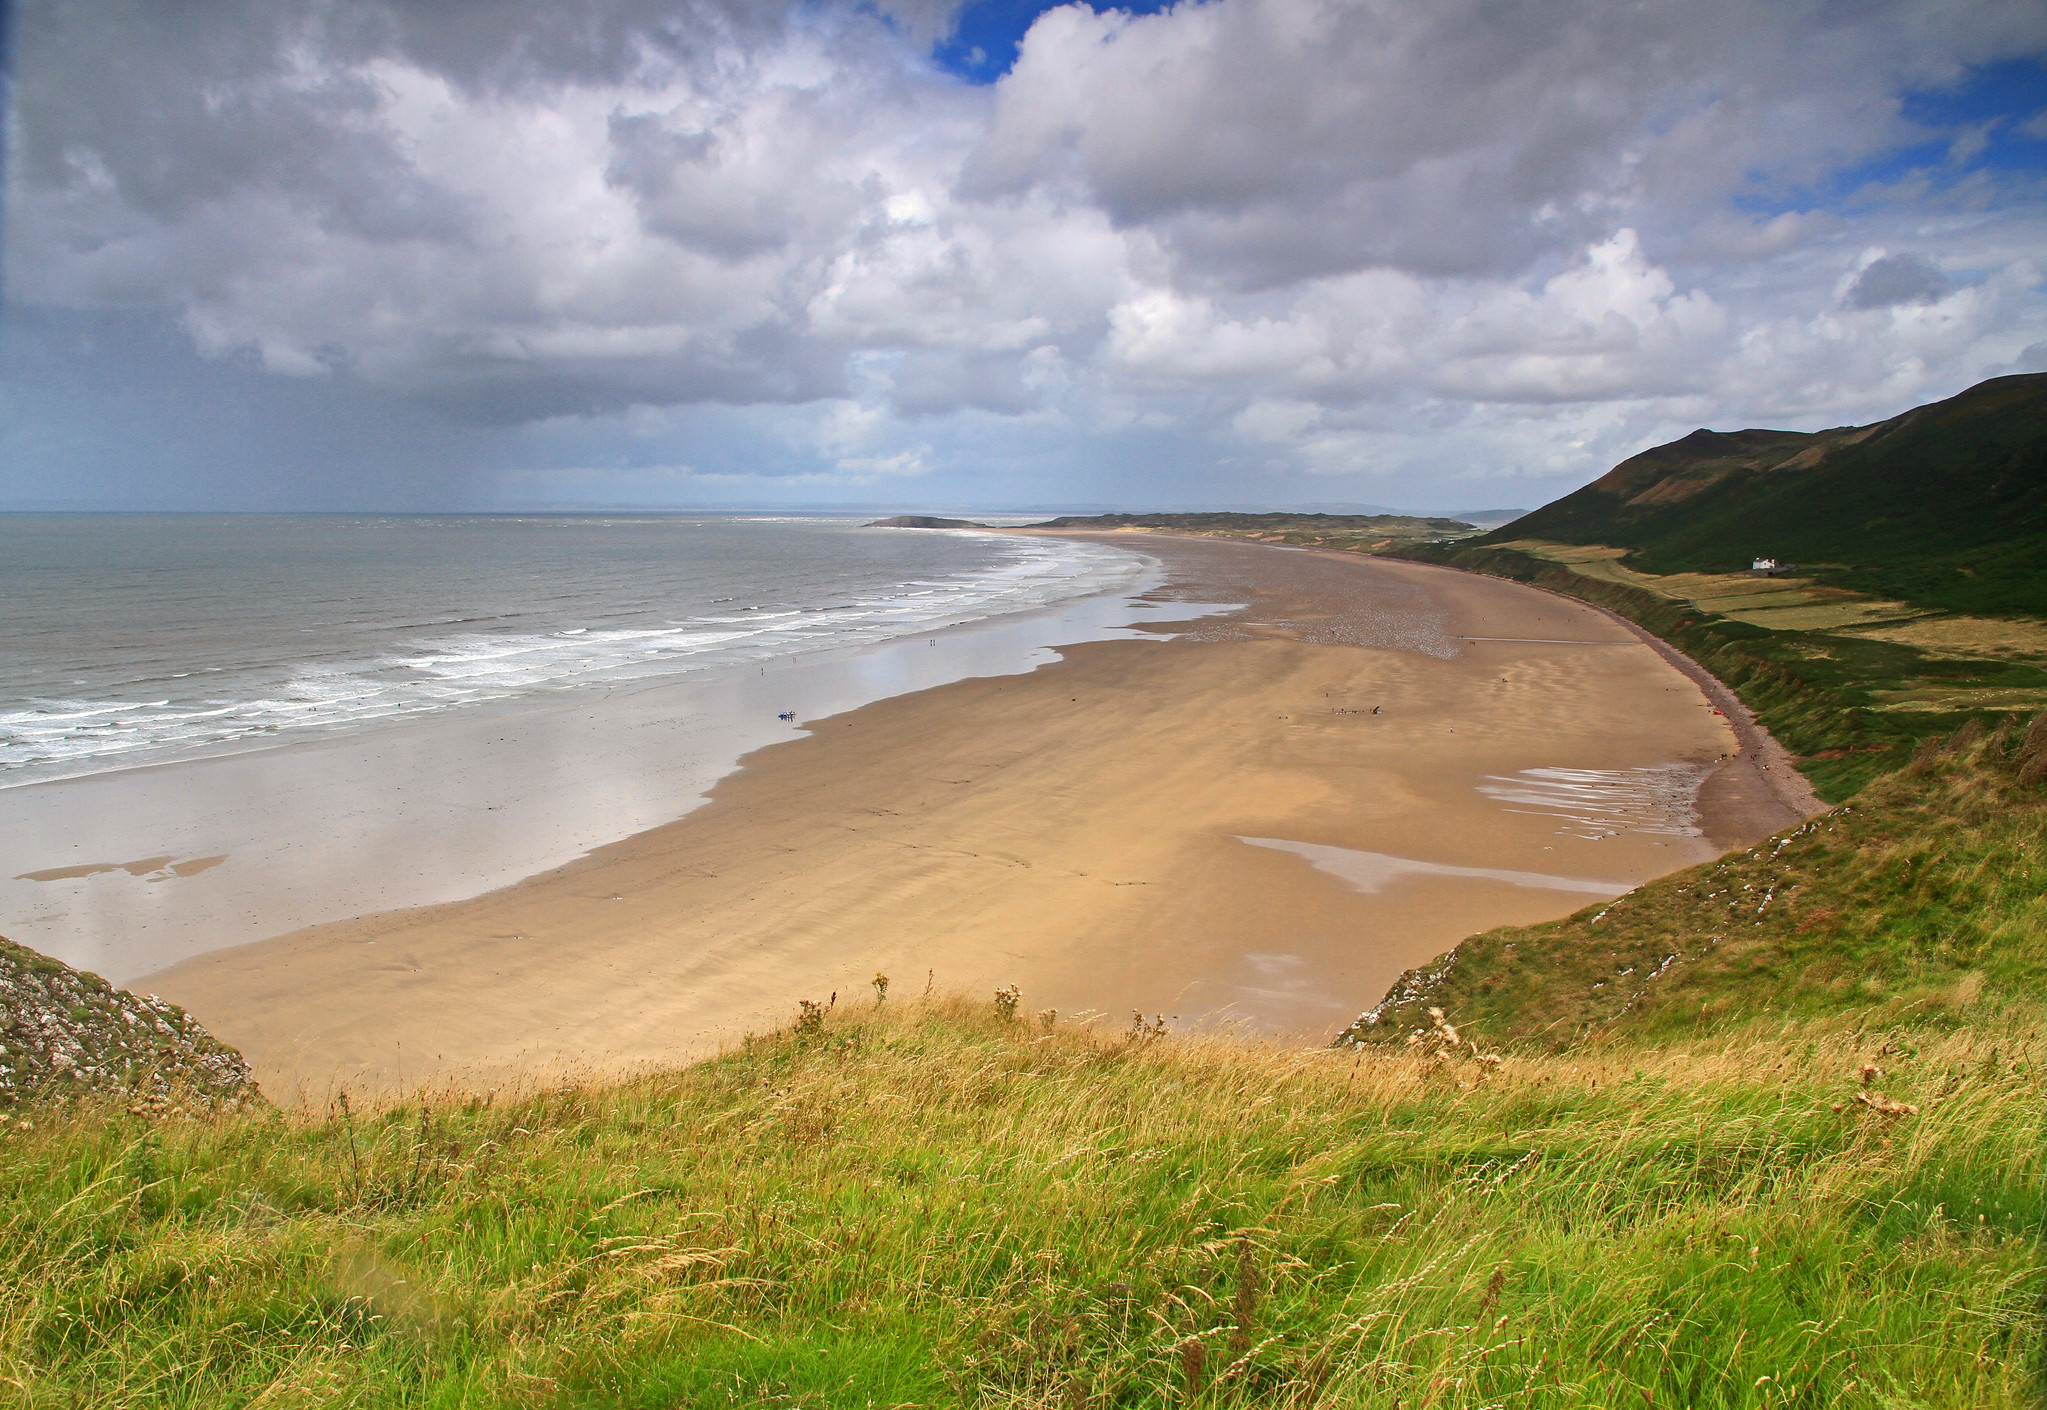 "Rhossili bay" by brianfagan is licensed under CC BY 2.0. To view a copy of this license, visit https://creativecommons.org/licenses/by/2.0/?ref=openverse.